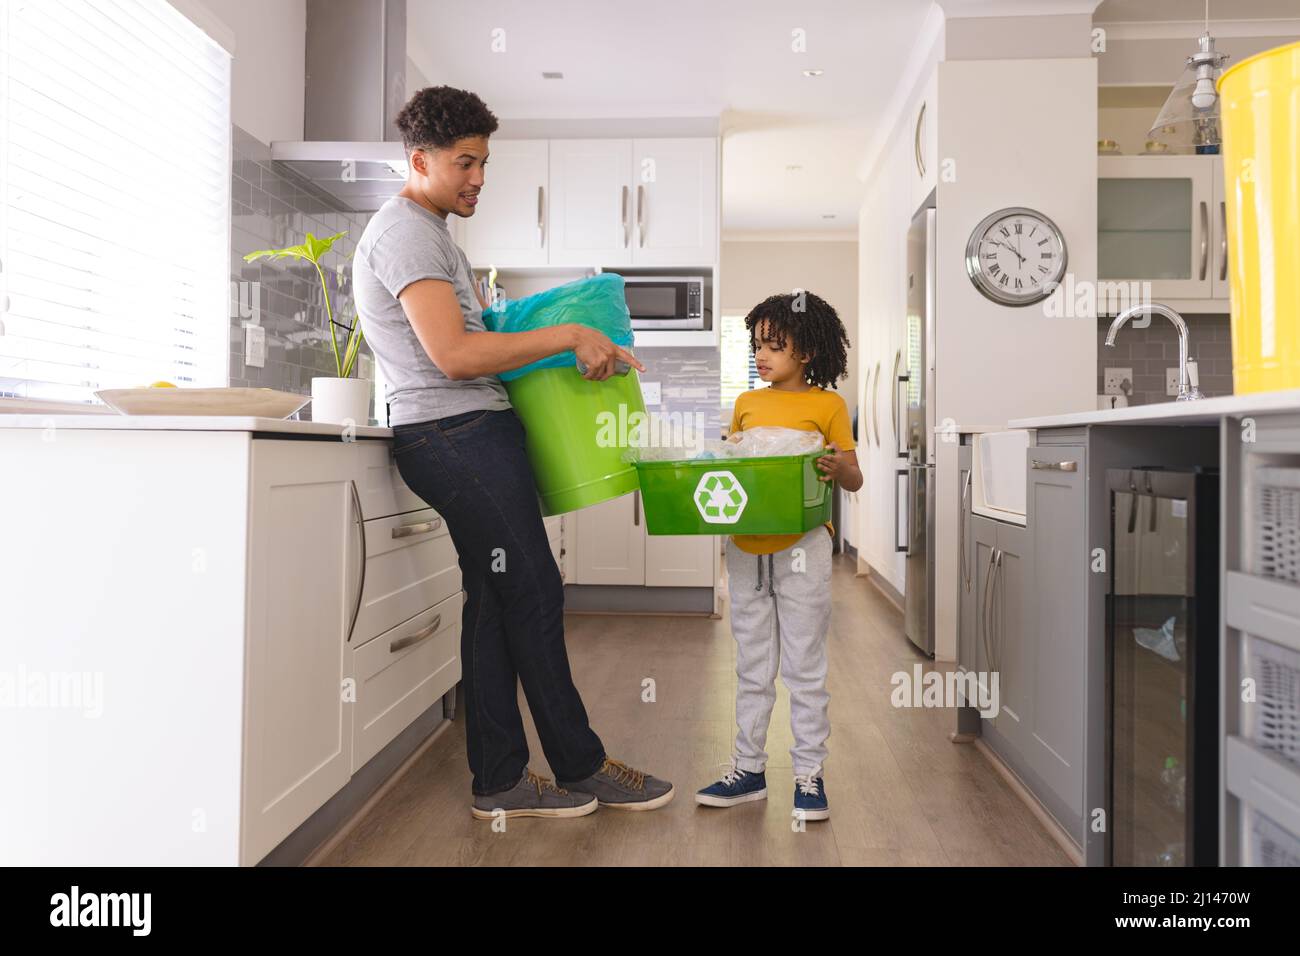 Hispanic man teaching son about waste management while standing in kitchen at home Stock Photo